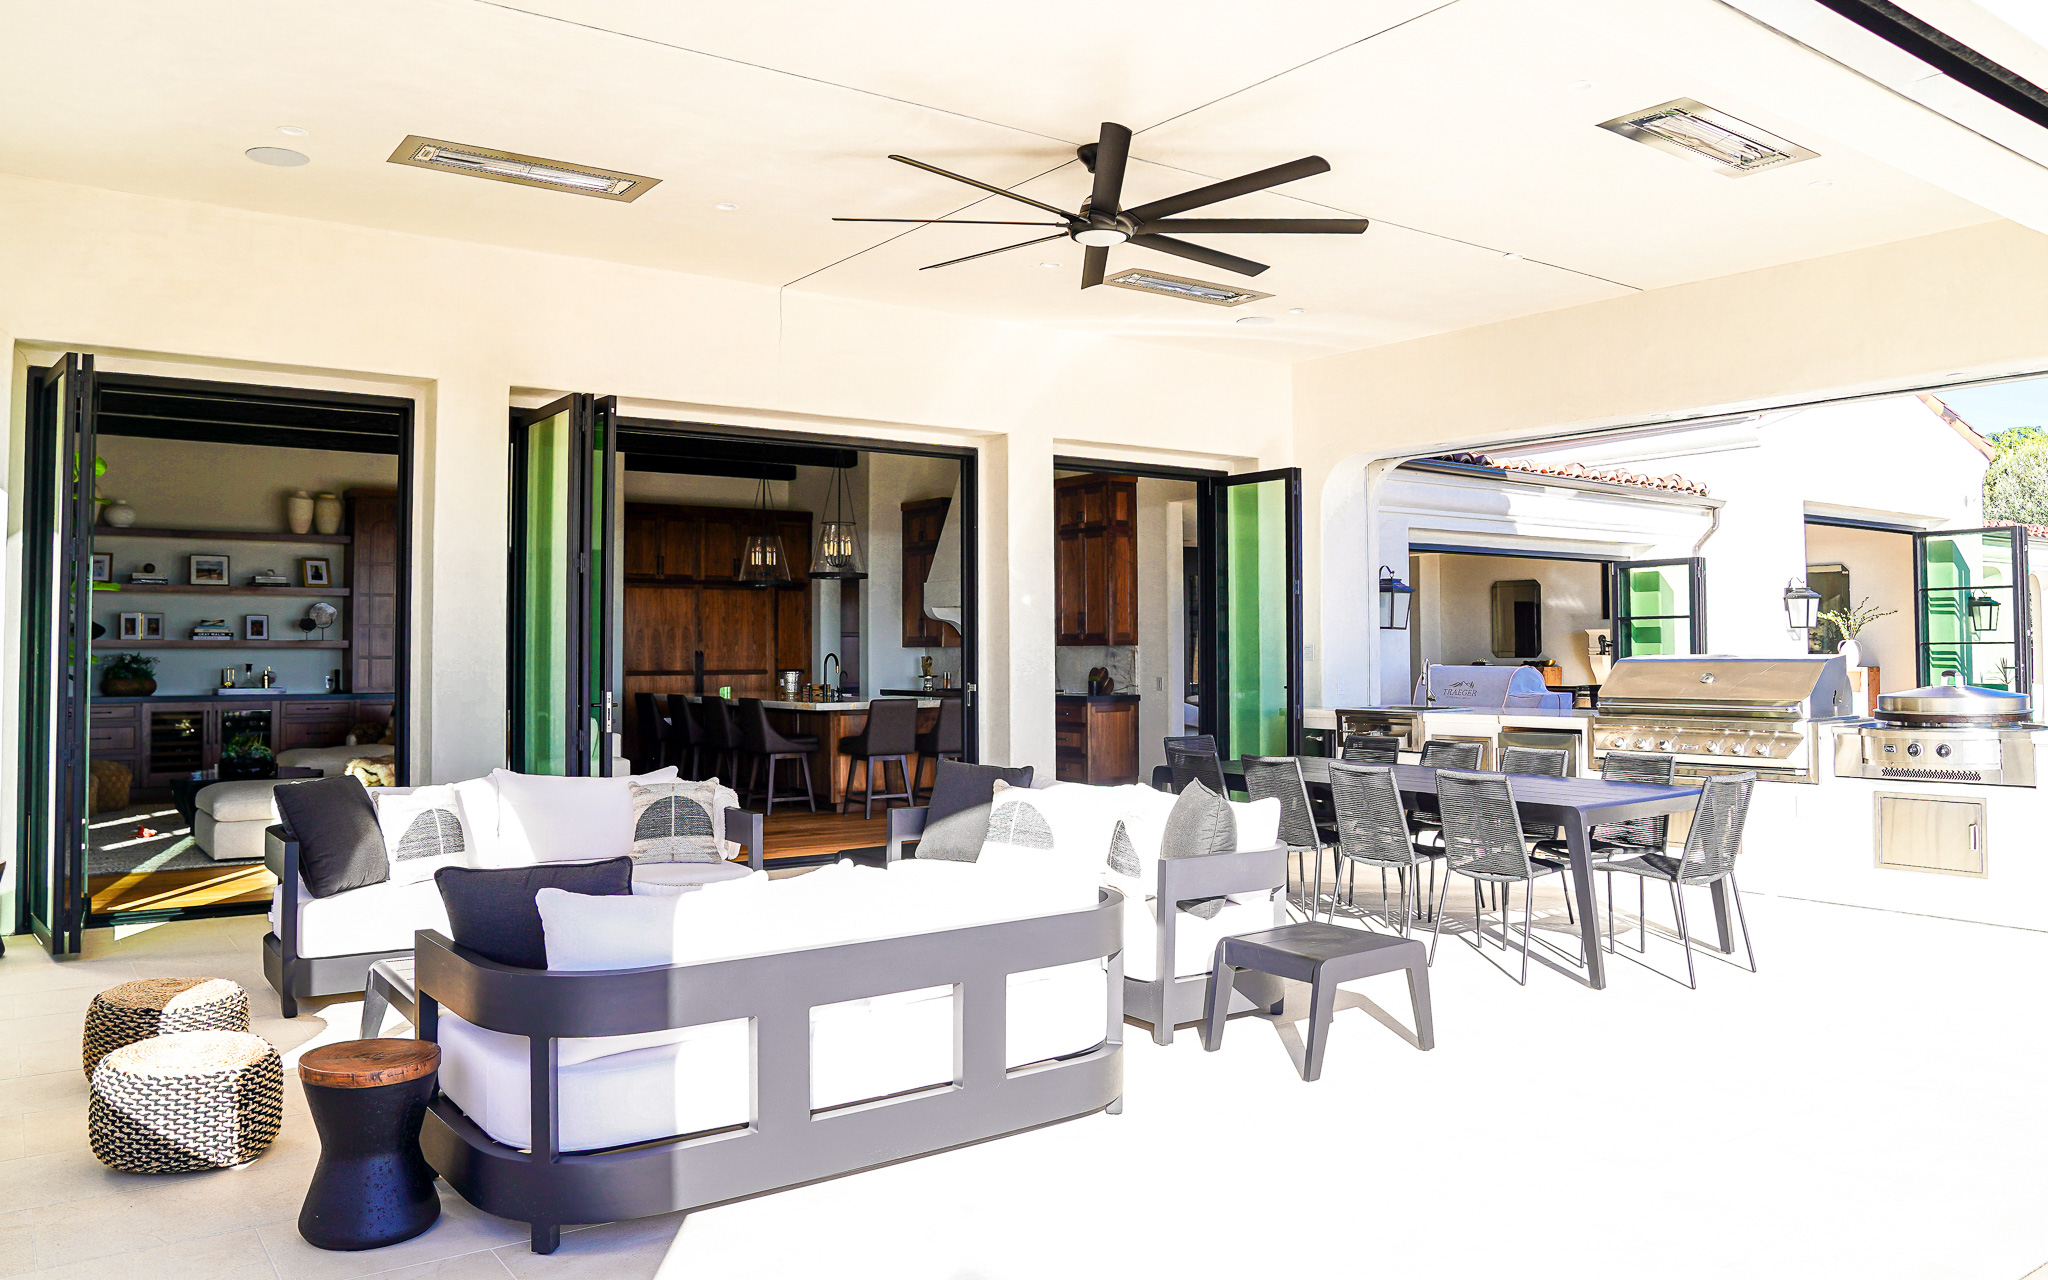 Luxurious outdoor patio area with a modern seating arrangement, ceiling fans, open folding doors, and an integrated kitchen with bar stools.